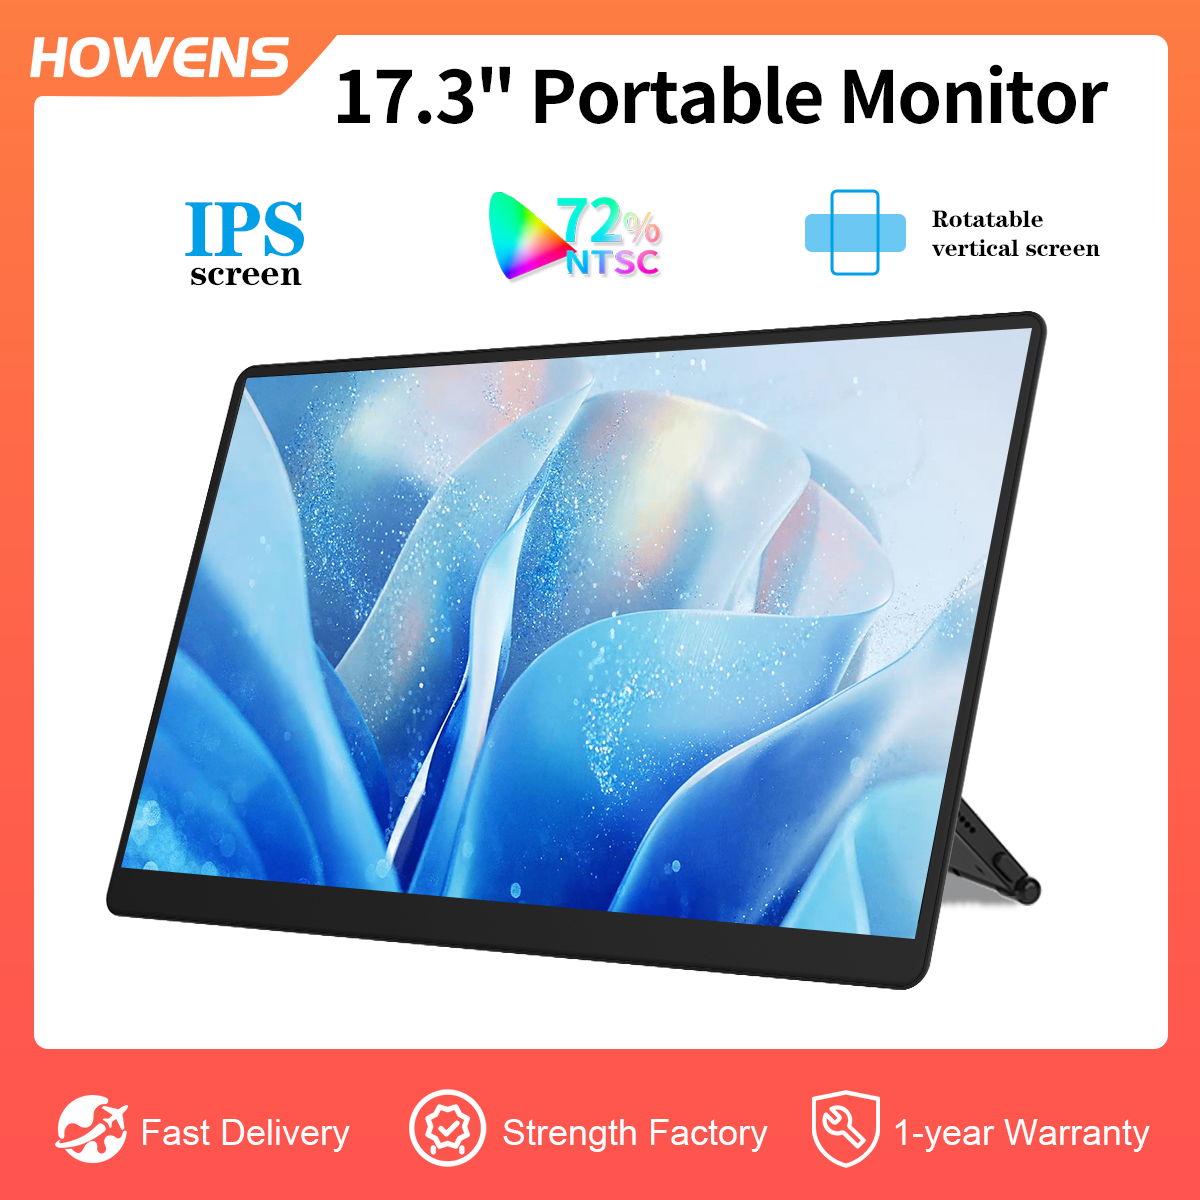 Portable Monitor with Rotatable Bracket/Suitable for Game Scene Display or PC,Mac,Phone Screen Extender/17.3 Inch FHD Screen/Dual Speakers,USB,HDMI and 2 Type-C ports/Compatible with PC, Mac, Xbox,Switch and PS5